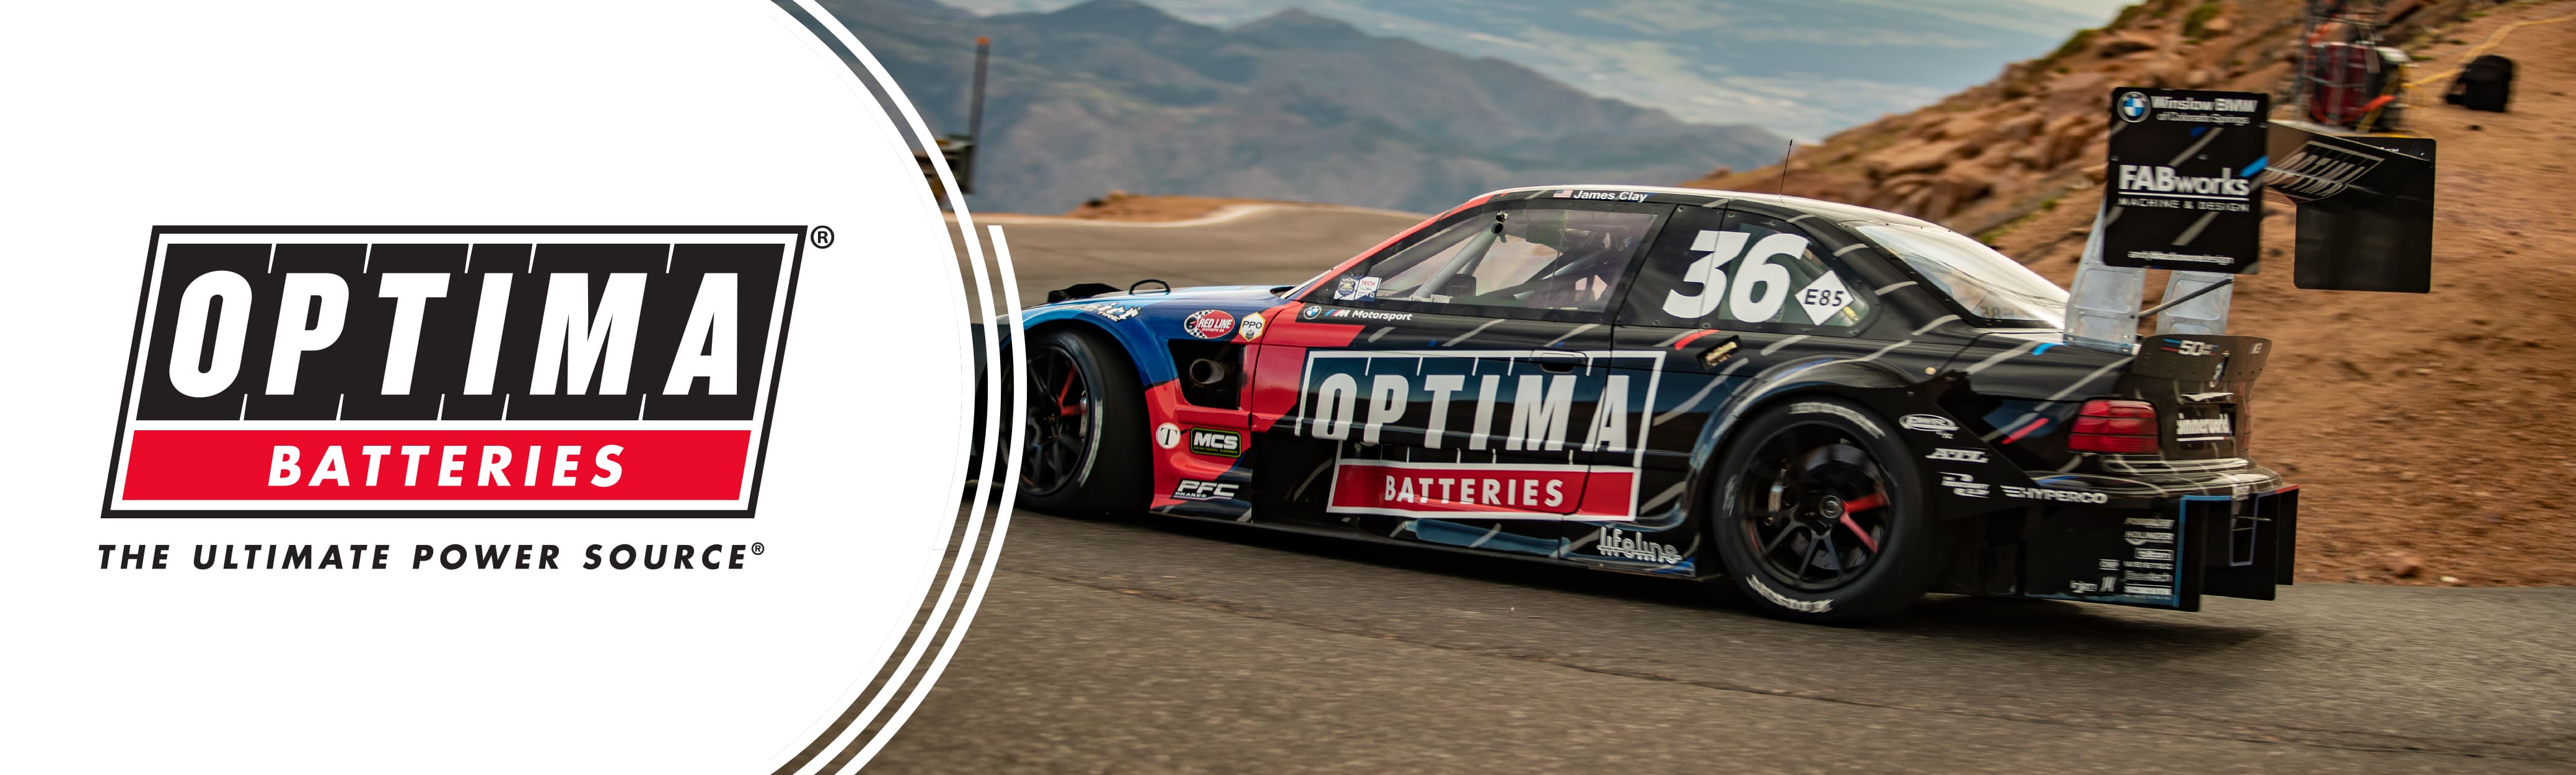 OPTIMA Batteries are the ultimate power source for any application